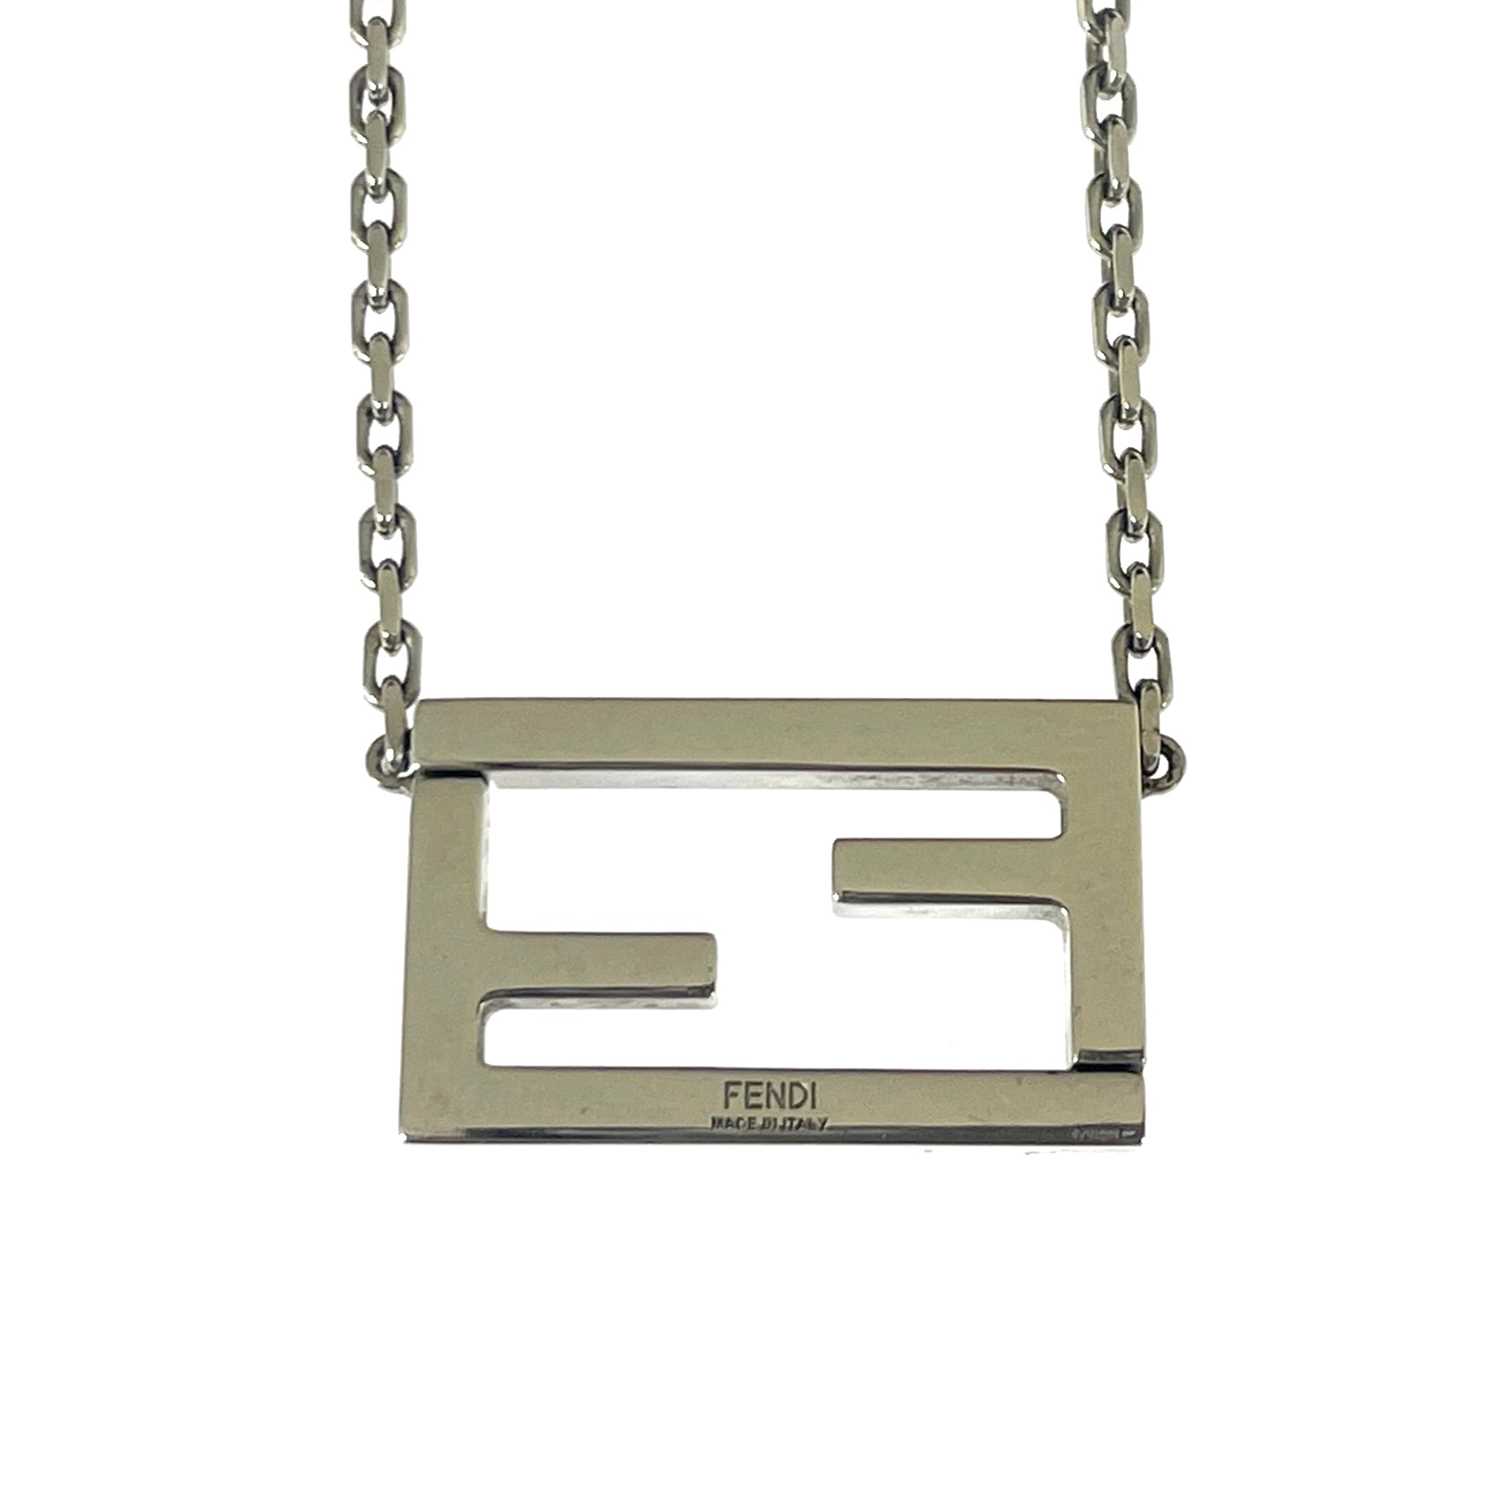 Fendi, a Zucca FF monogram necklace, crafted from silver-tone hardware, featuring the maker's FF